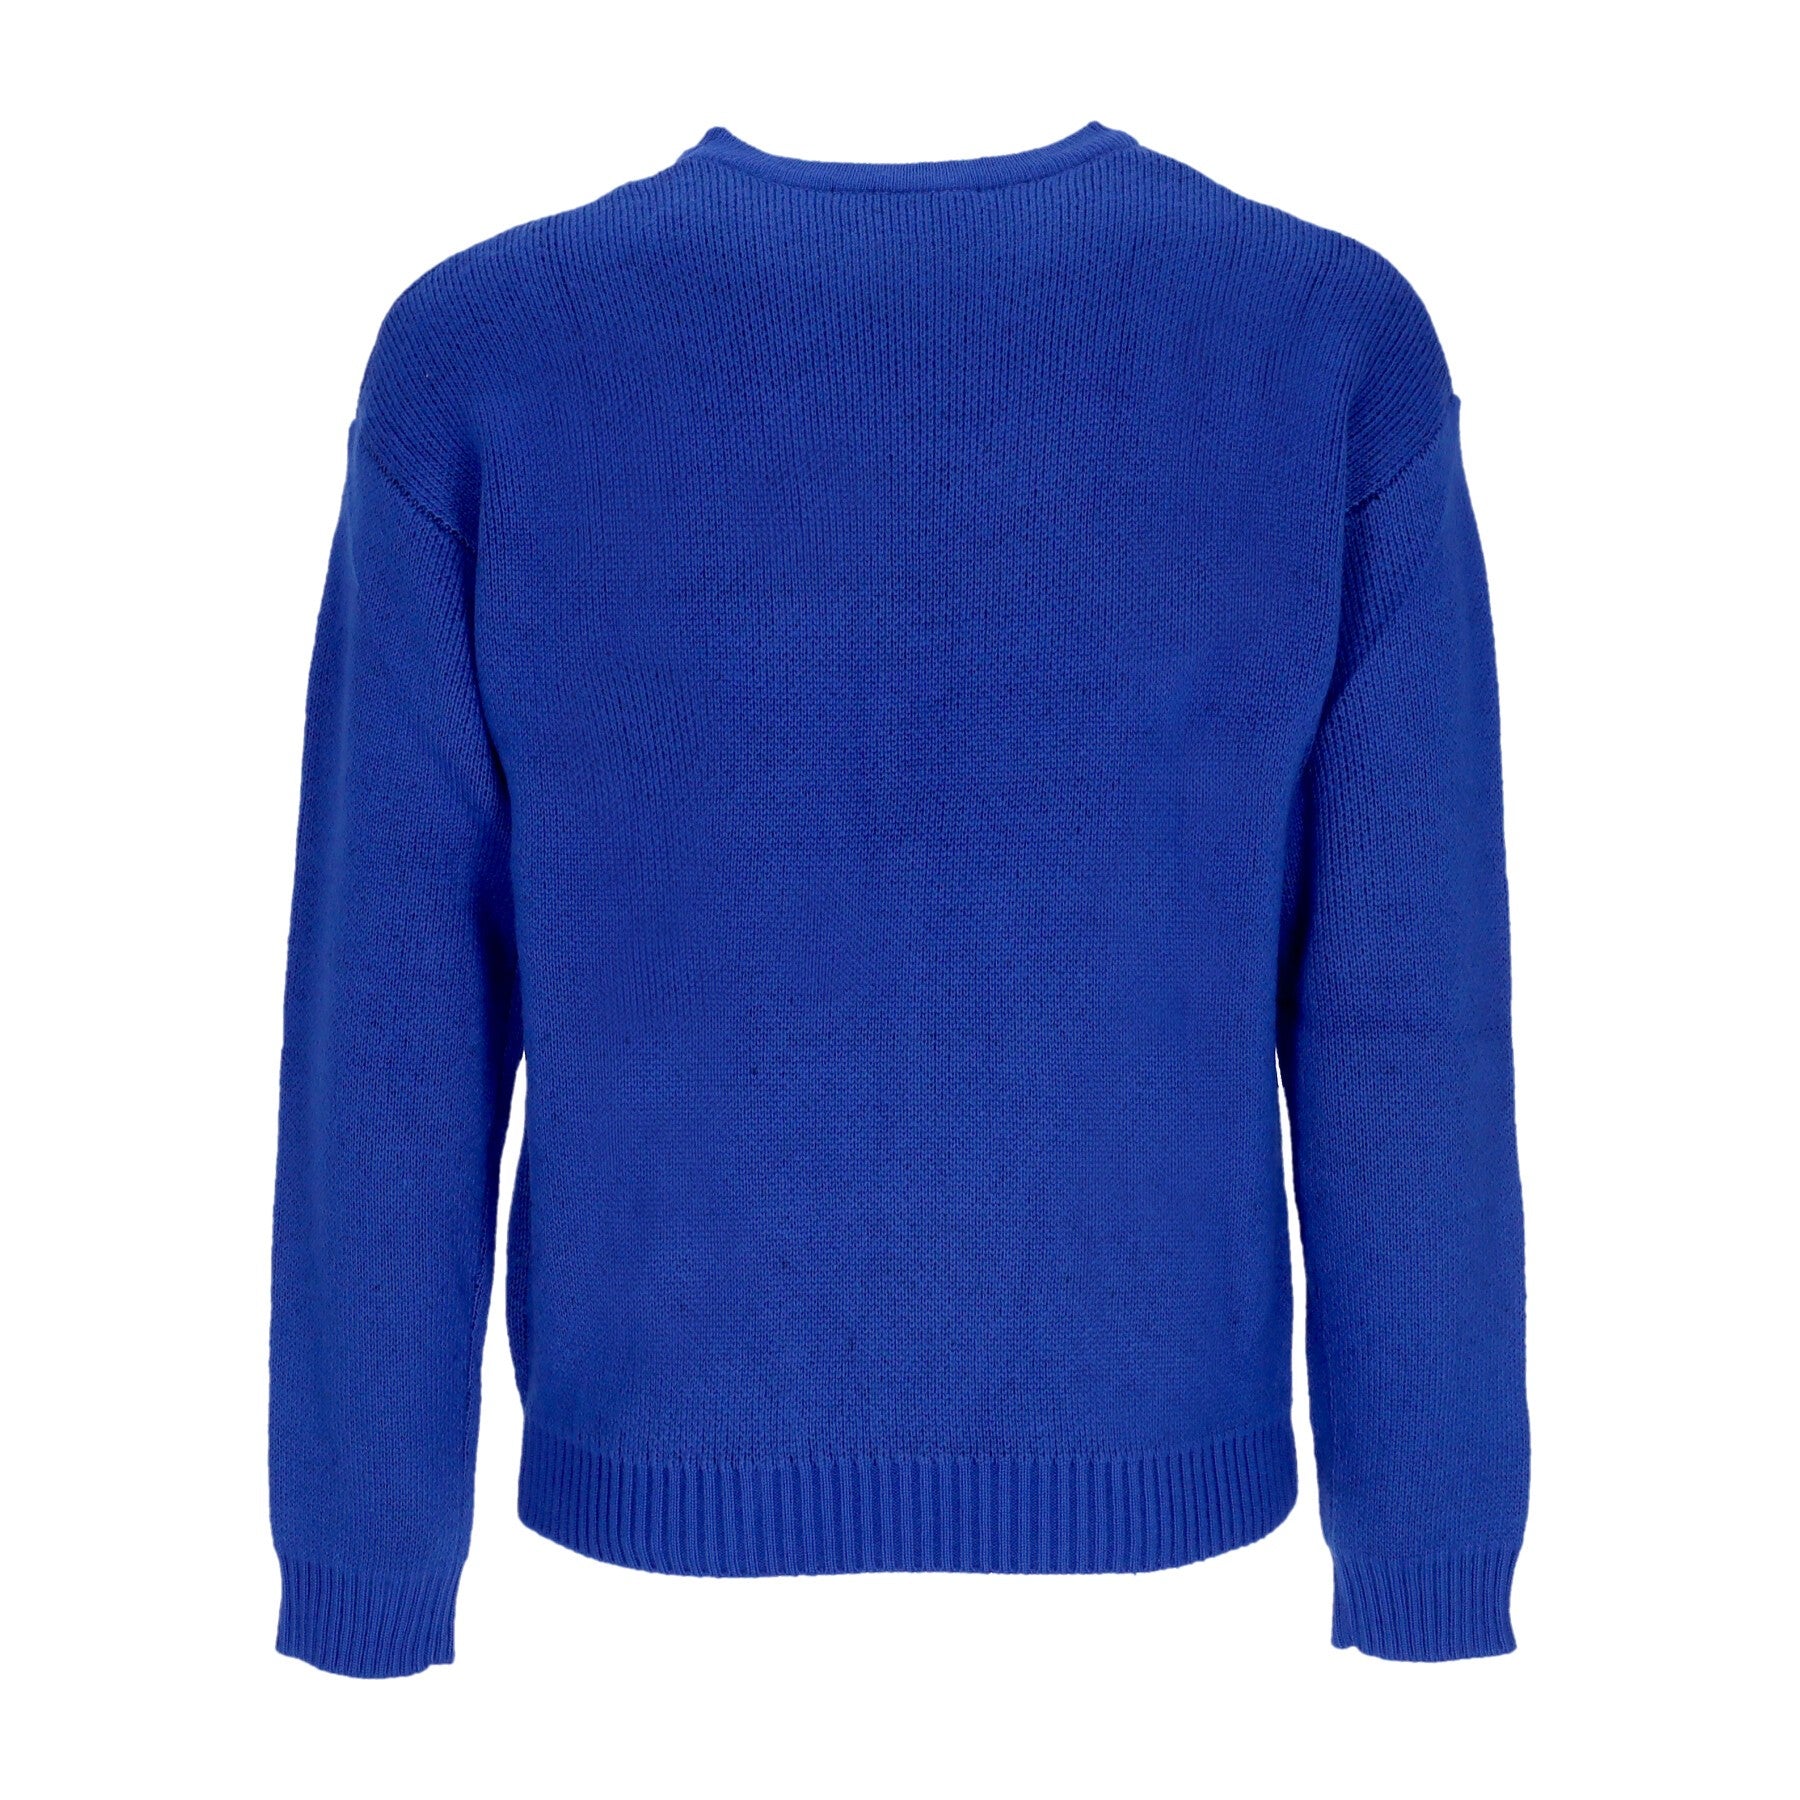 Usualism Sweater Men's Sweater